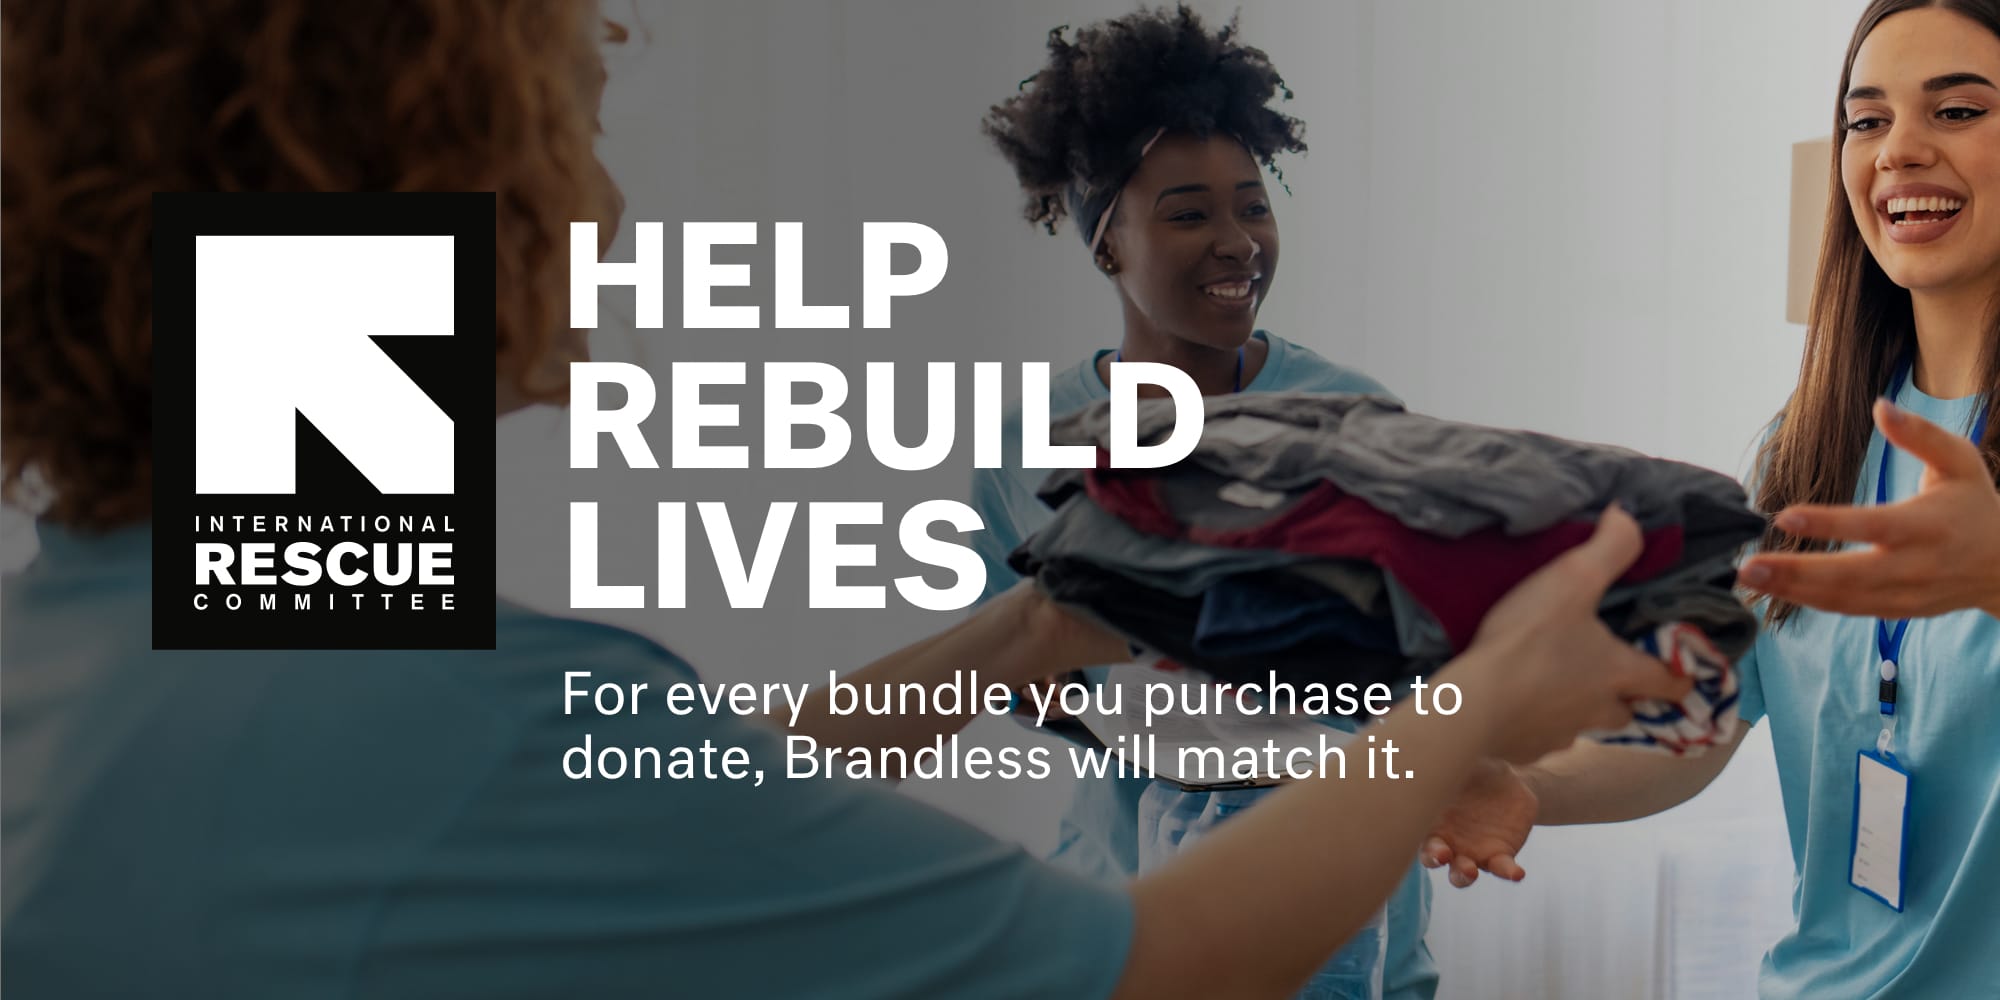 Help rebuild lives with the International Rescue Committee.  For every donation bundle you purchase, Brandless will match it.